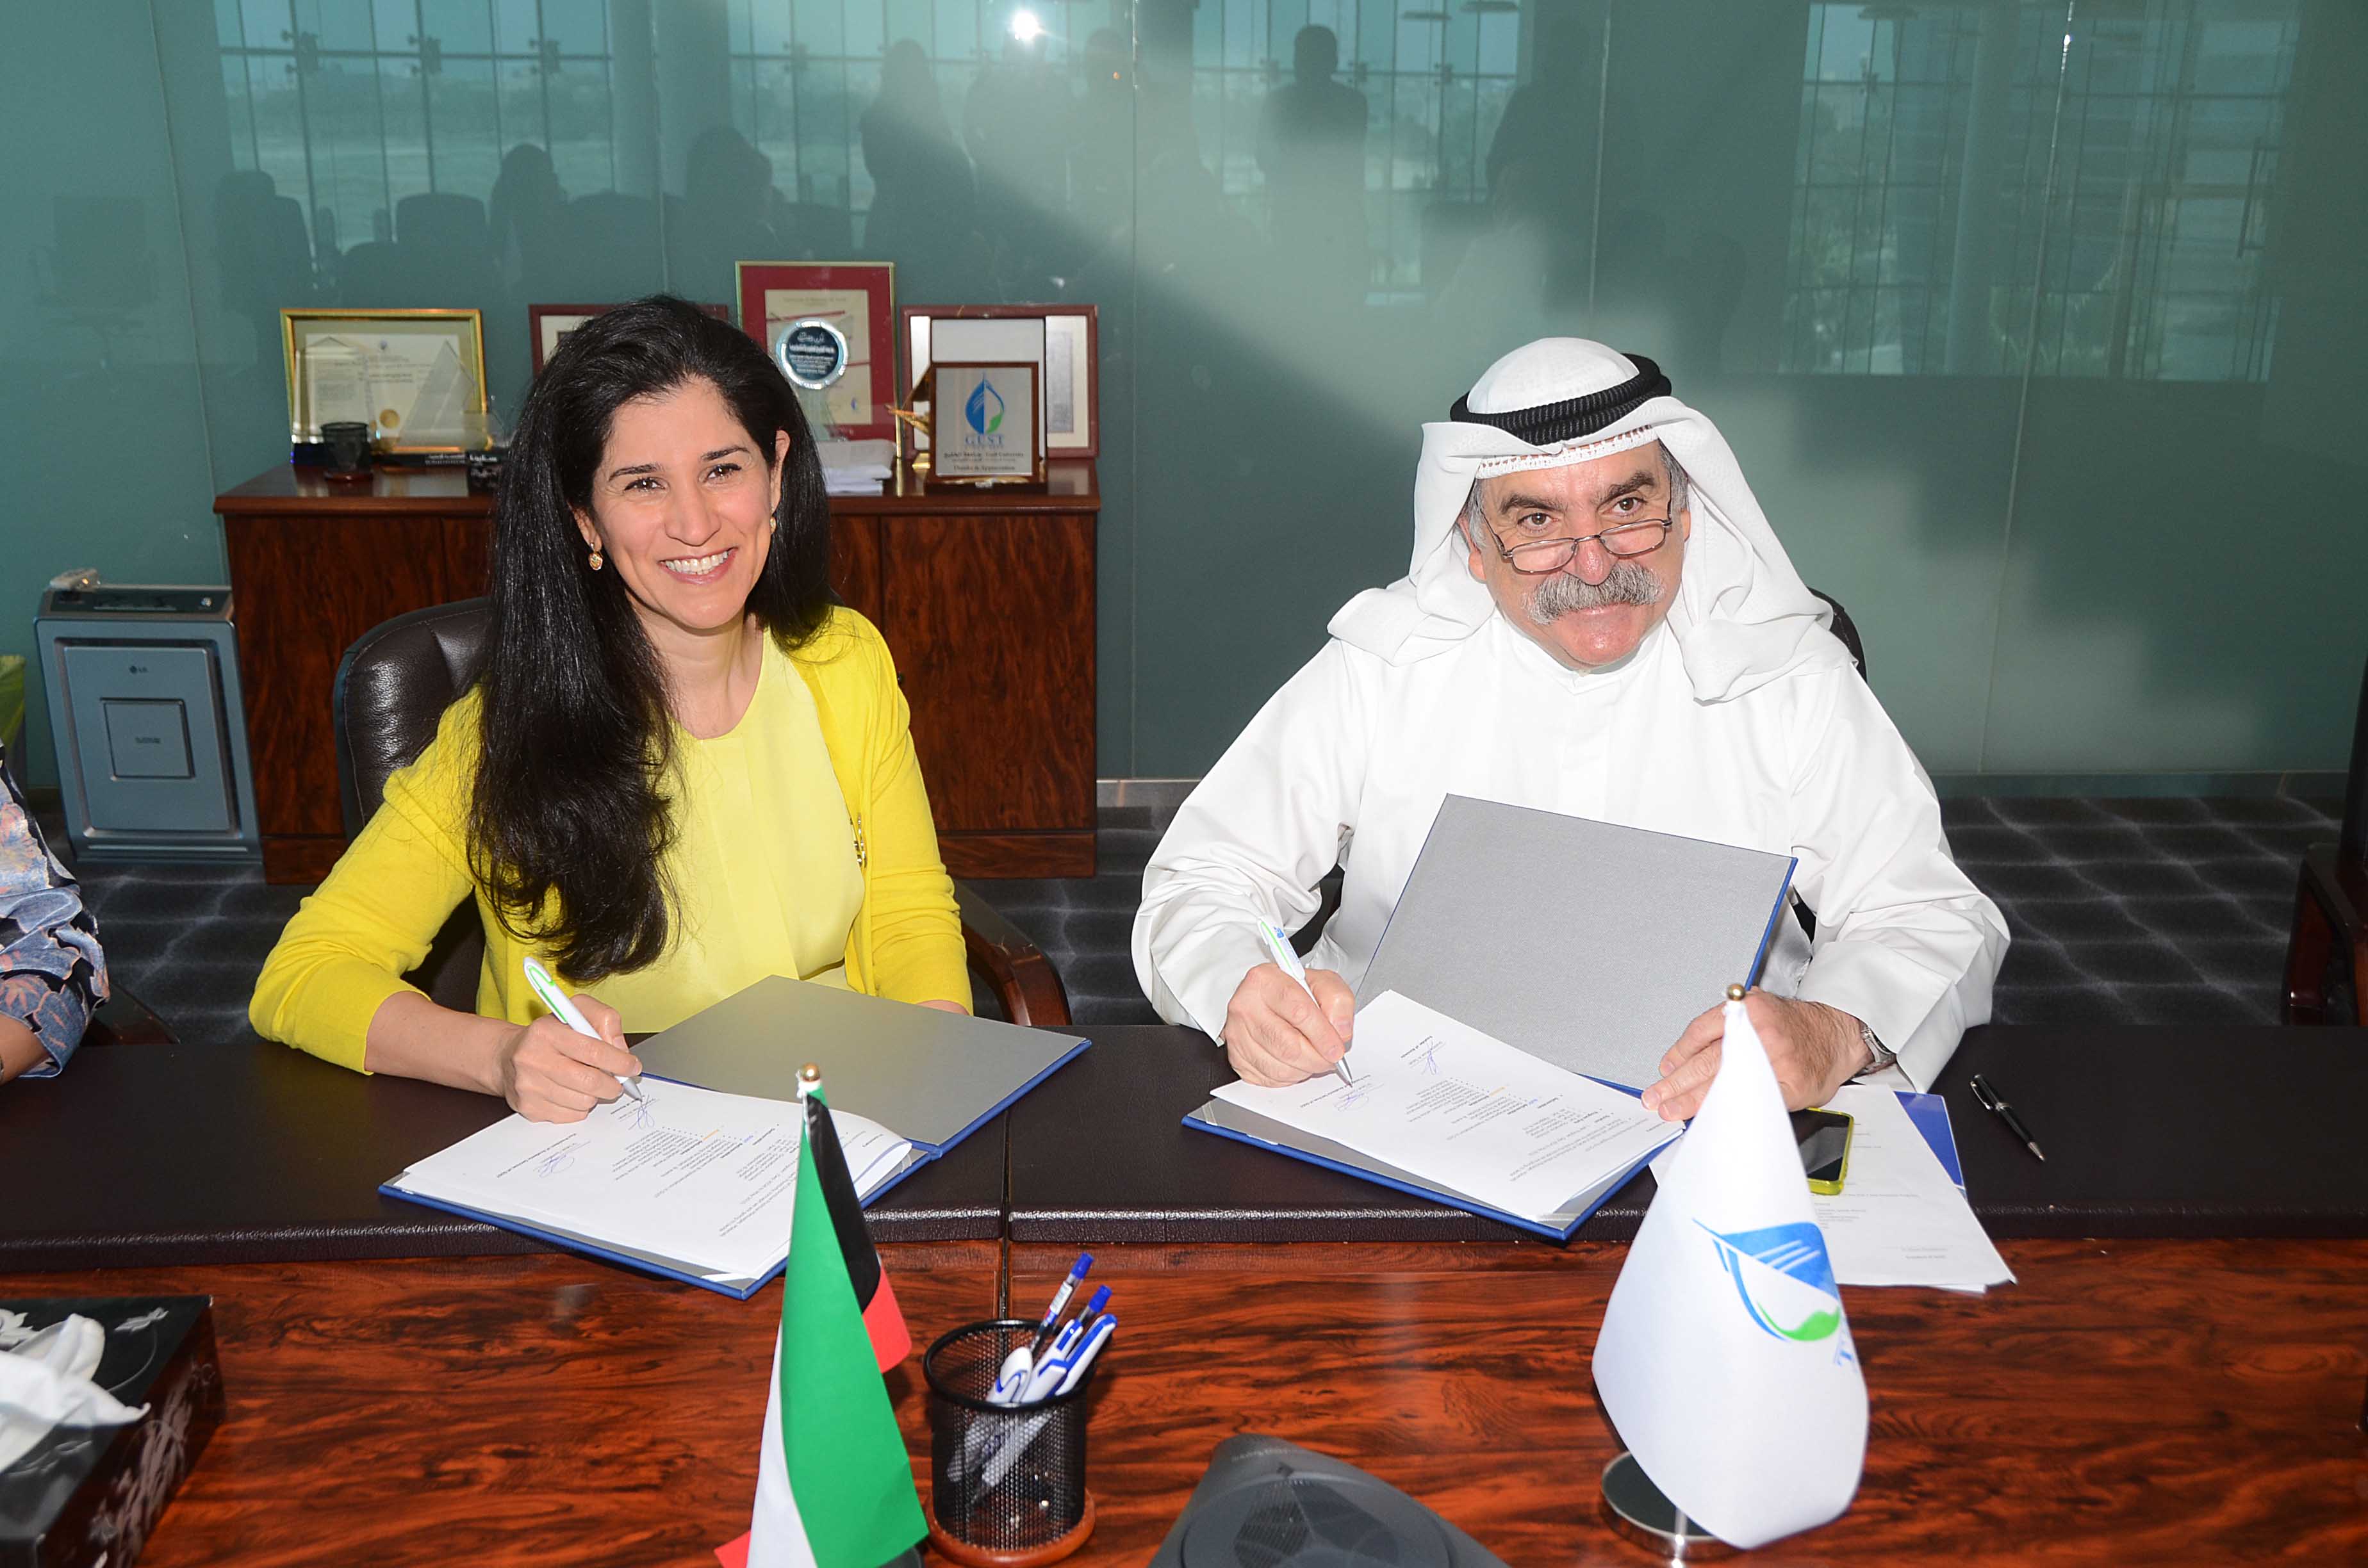 Sheikha Intisar Salem Al-Ali Al-Sabah signing the agreement with Gulf University for Science and Technology (GUST)